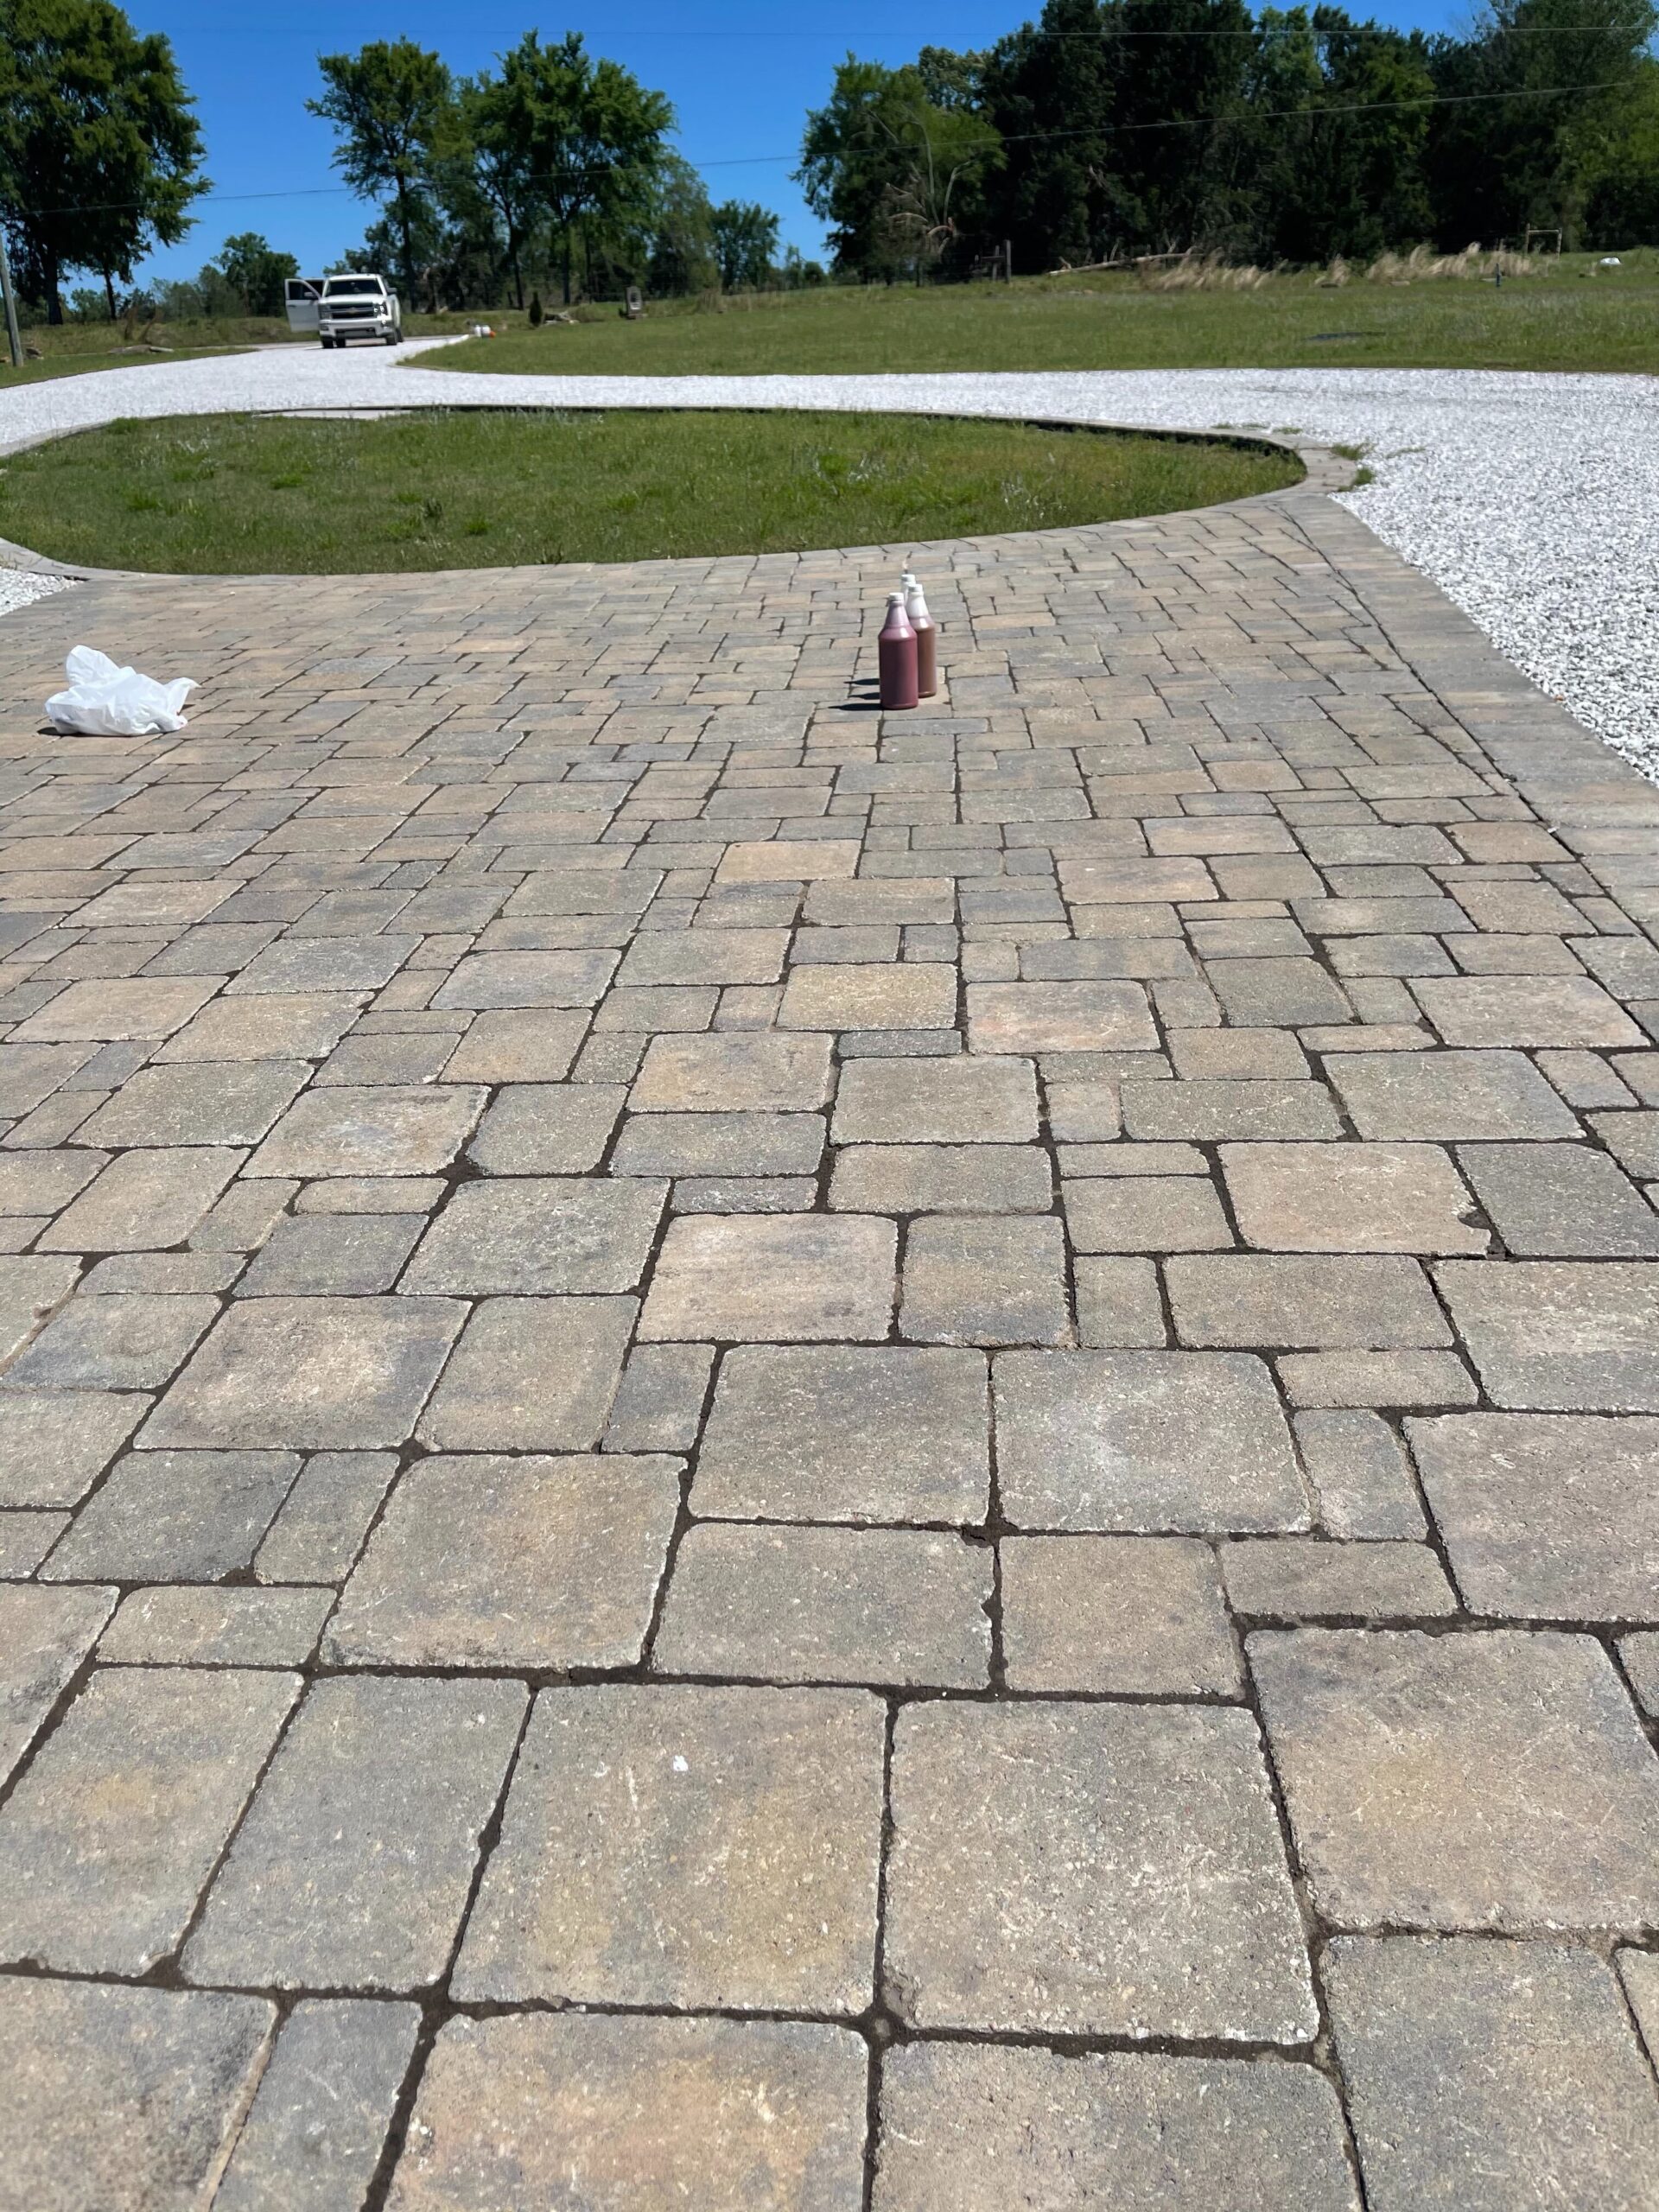 A faded, lackluster paver driveway in need of a color refresh